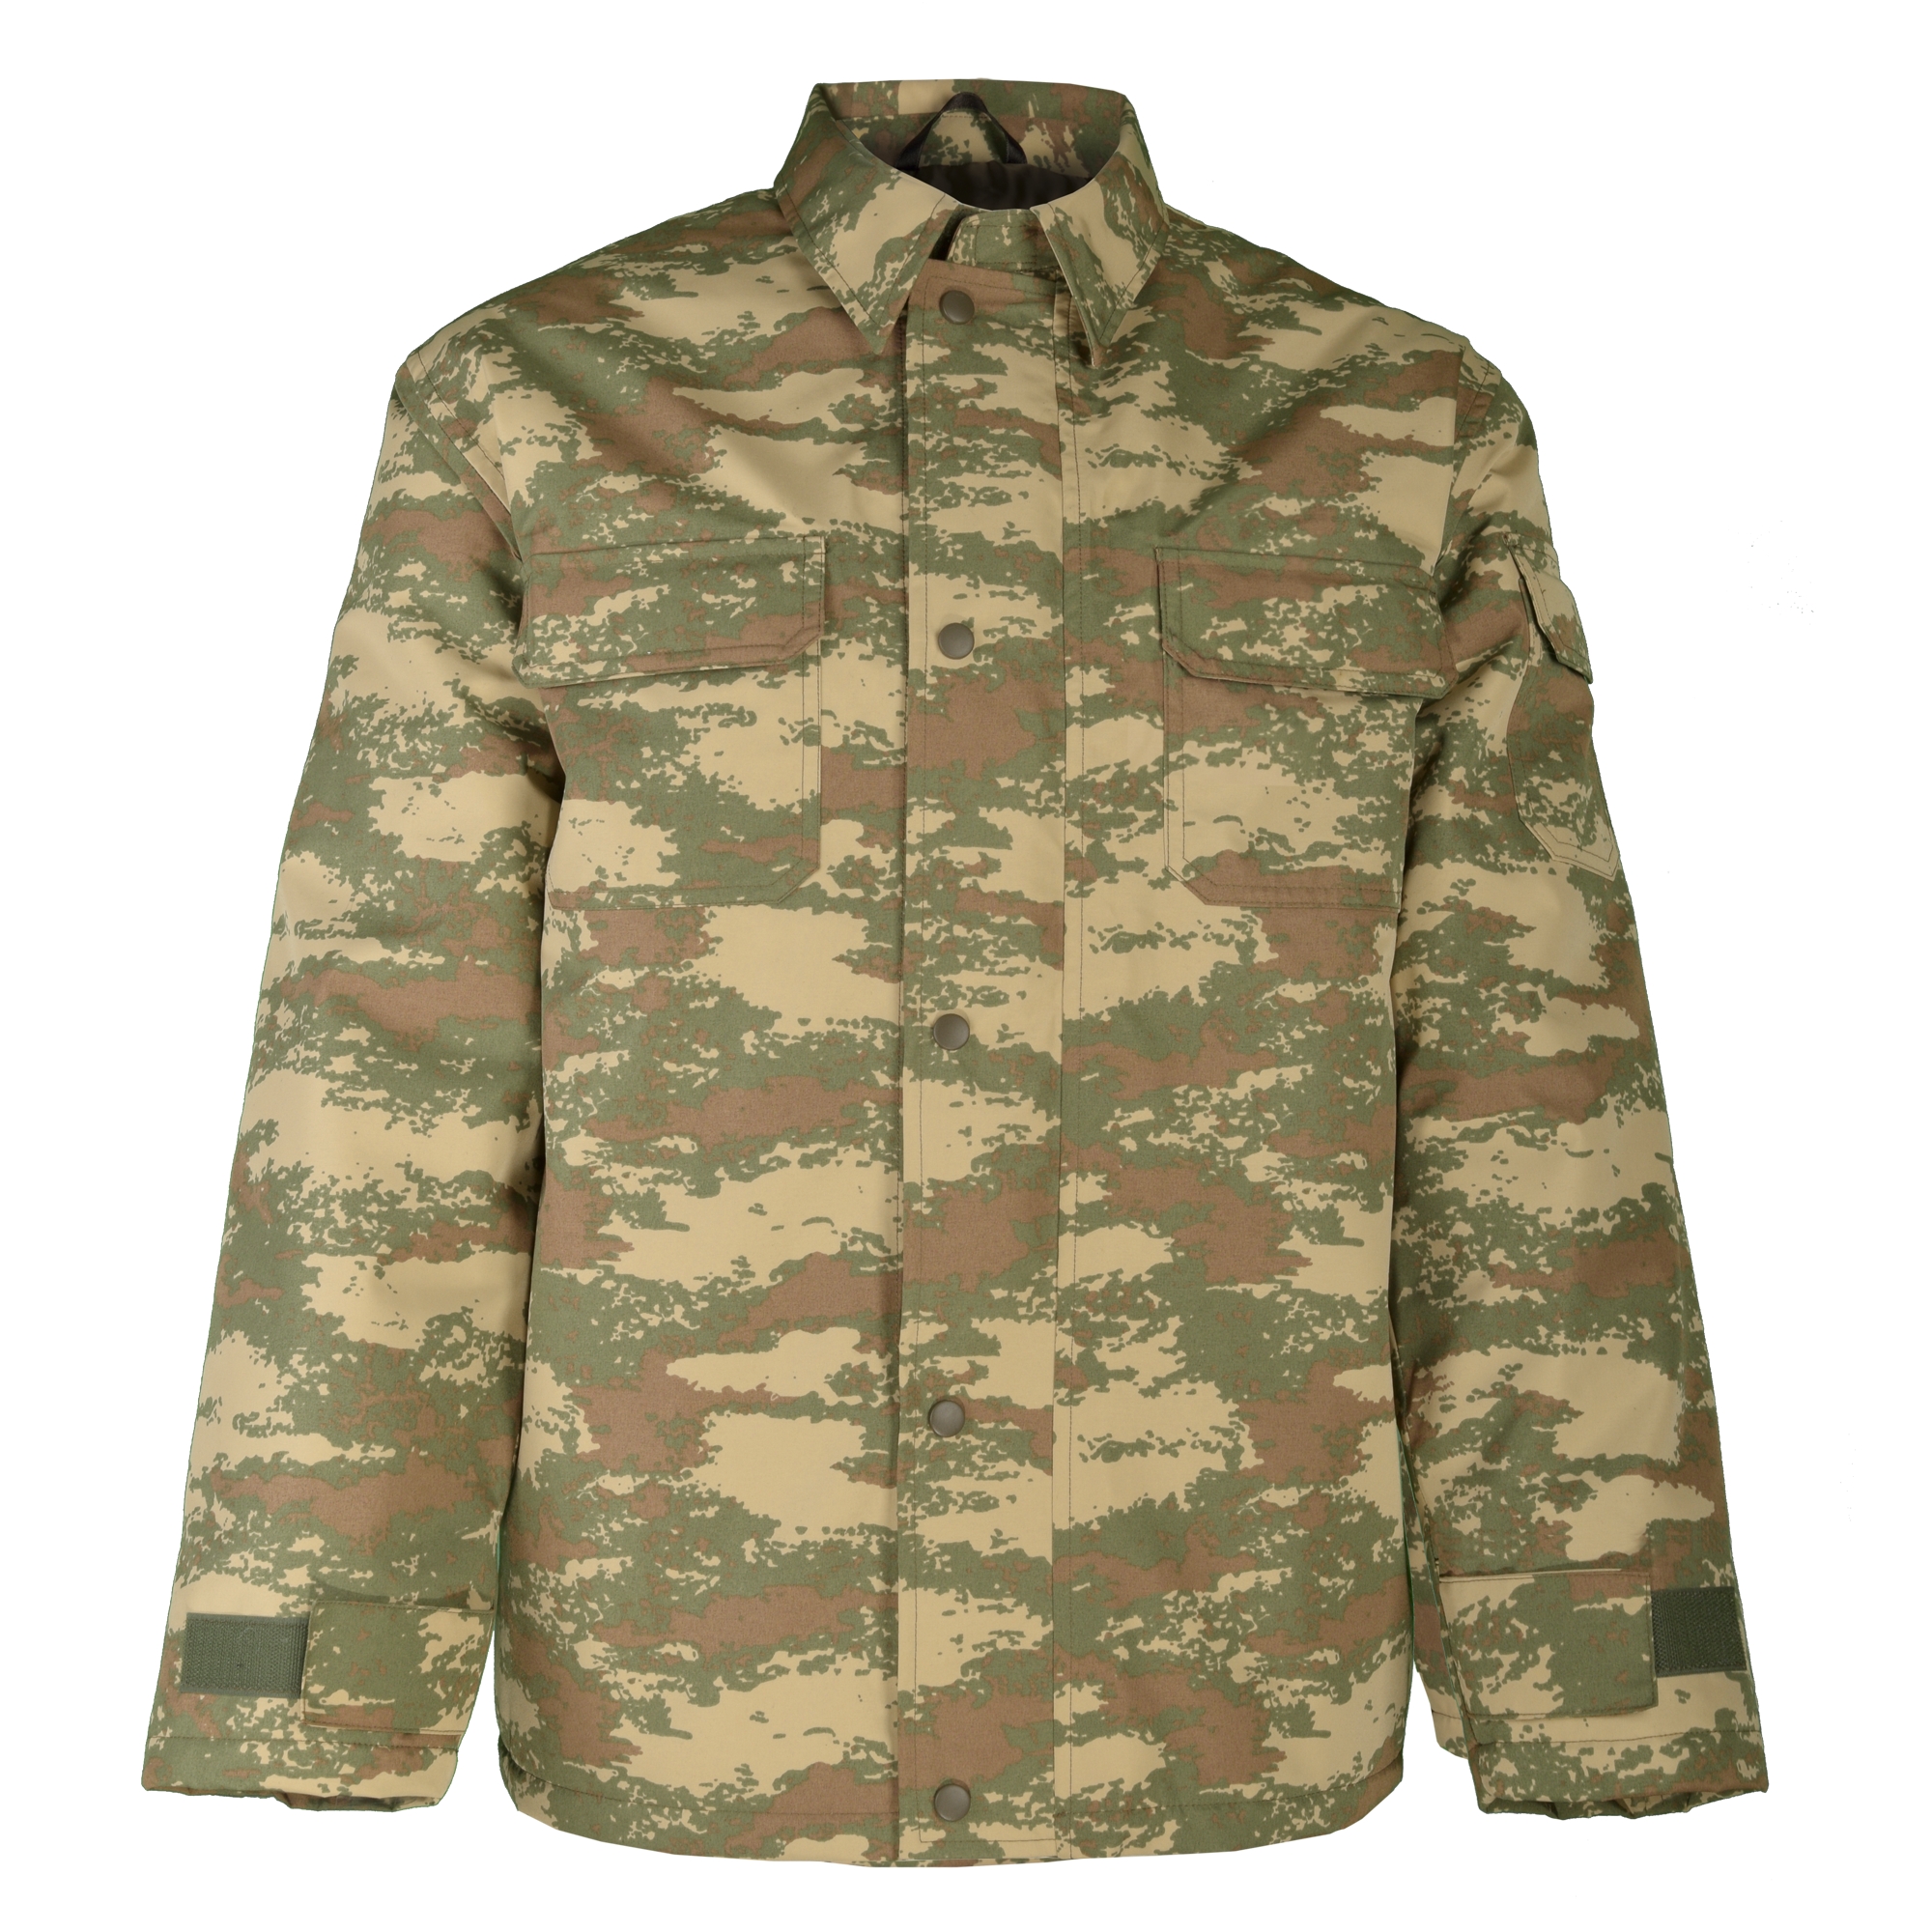 Cold weather garment – winter uniform for Turkish army